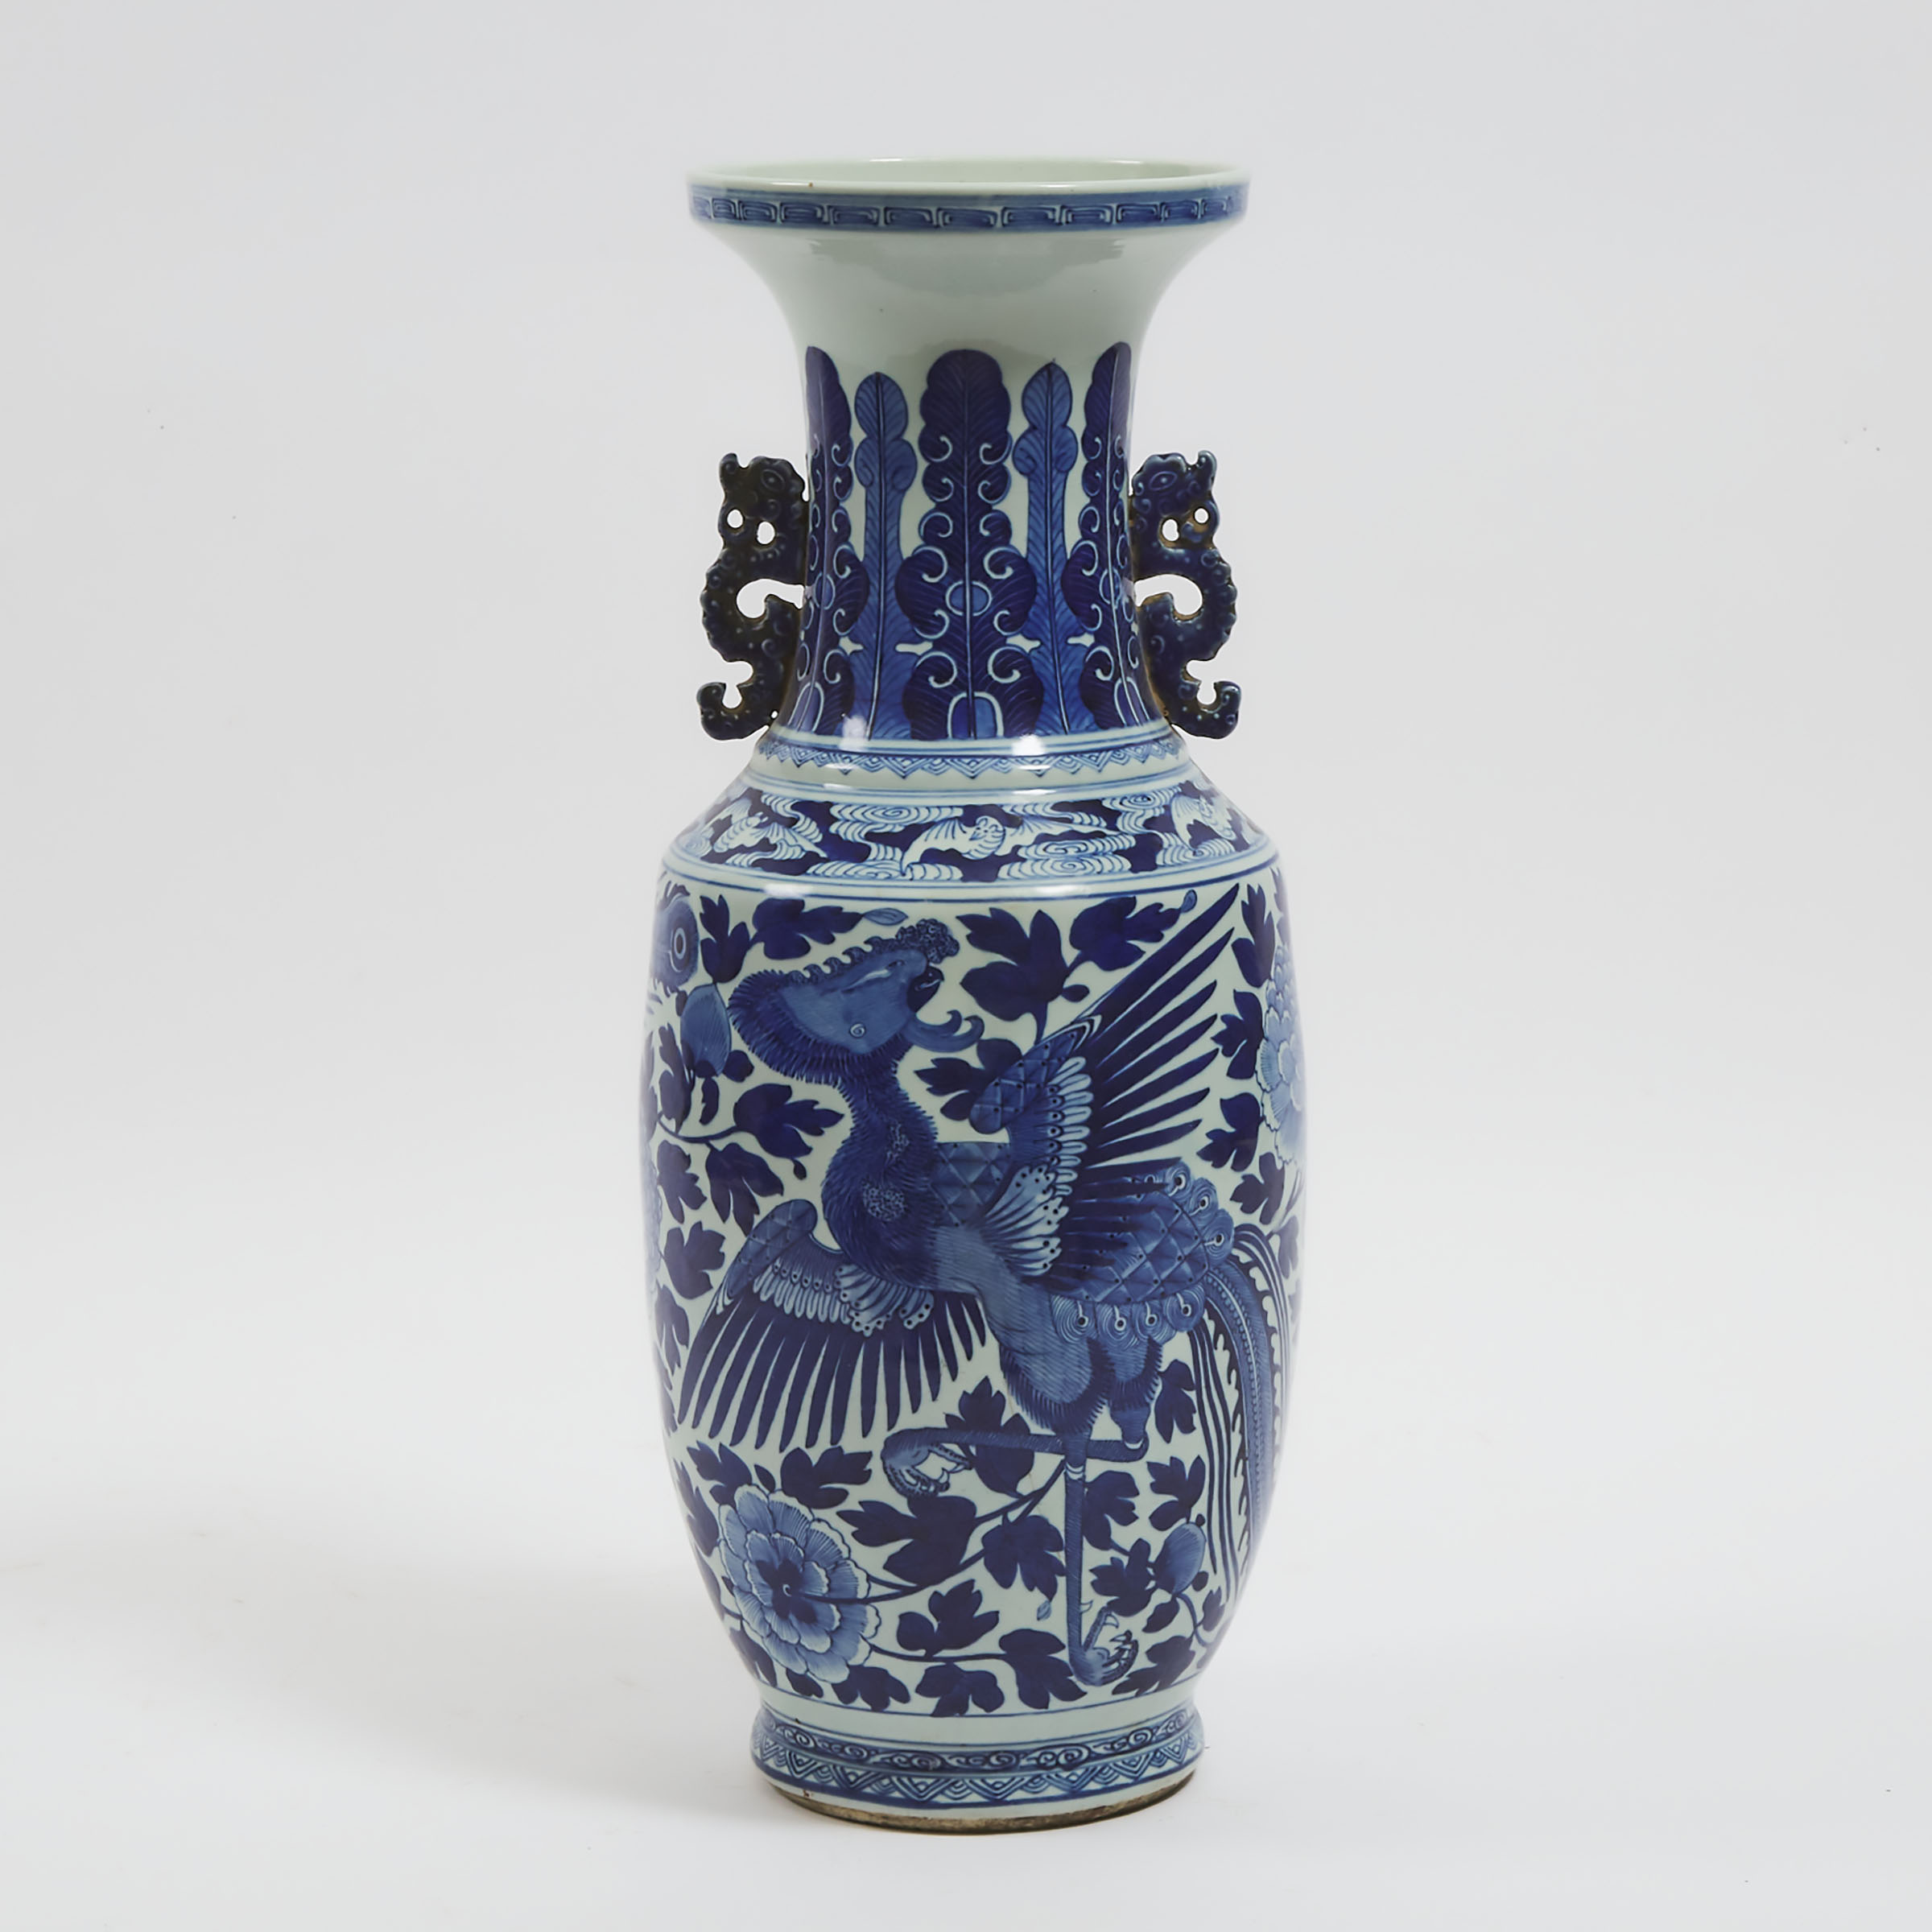 A Blue and White Phoenix Vase, Early